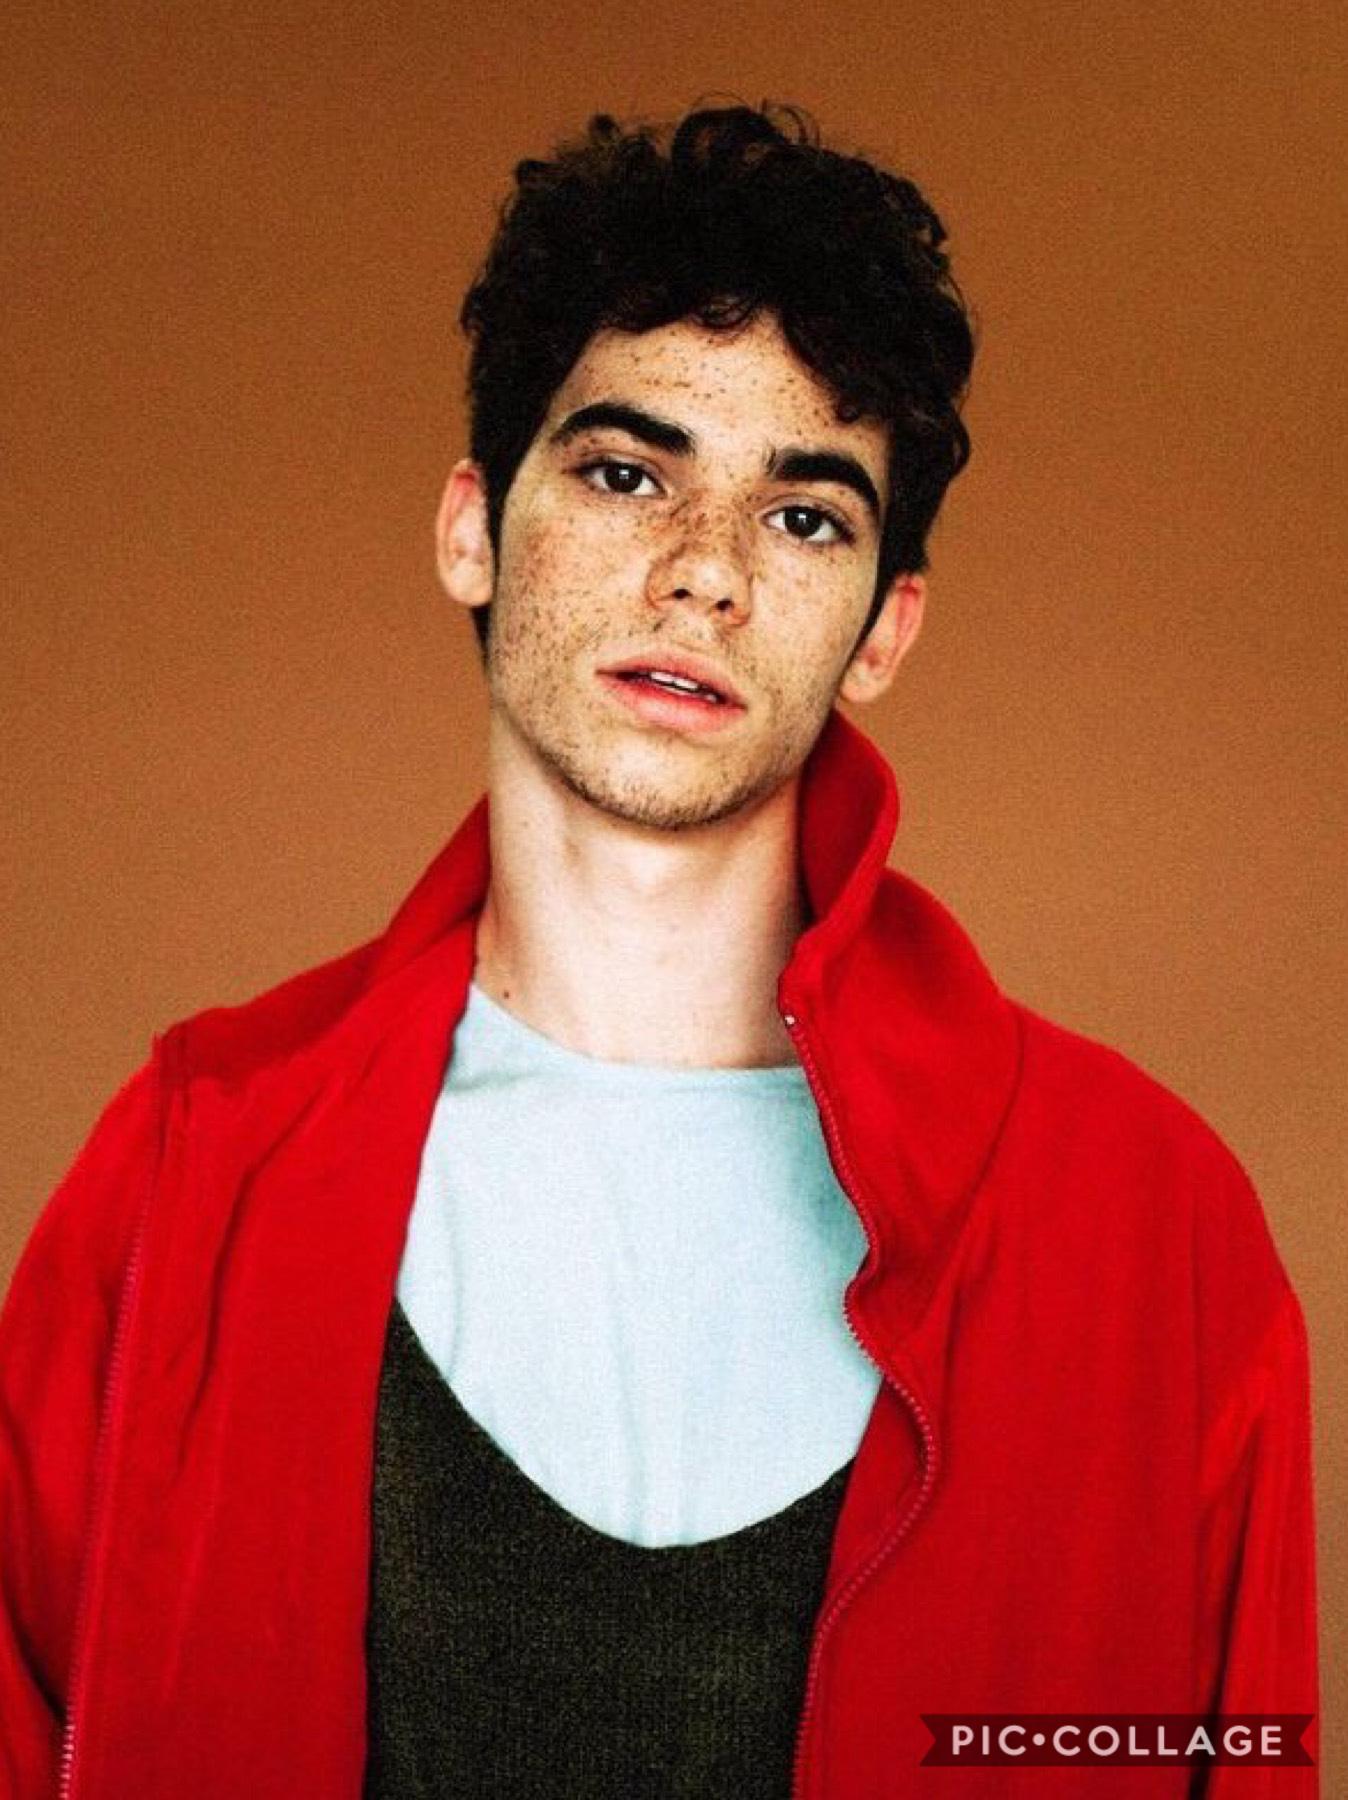 He will be forever missed.i remember everyday I would watch Jessie. He was one of the many childhood crushes and still is, we have lost another amazing person as he will never be forgotten. Rest In Peace Cameron Boyce and fly high. 
☁️🌟♥️